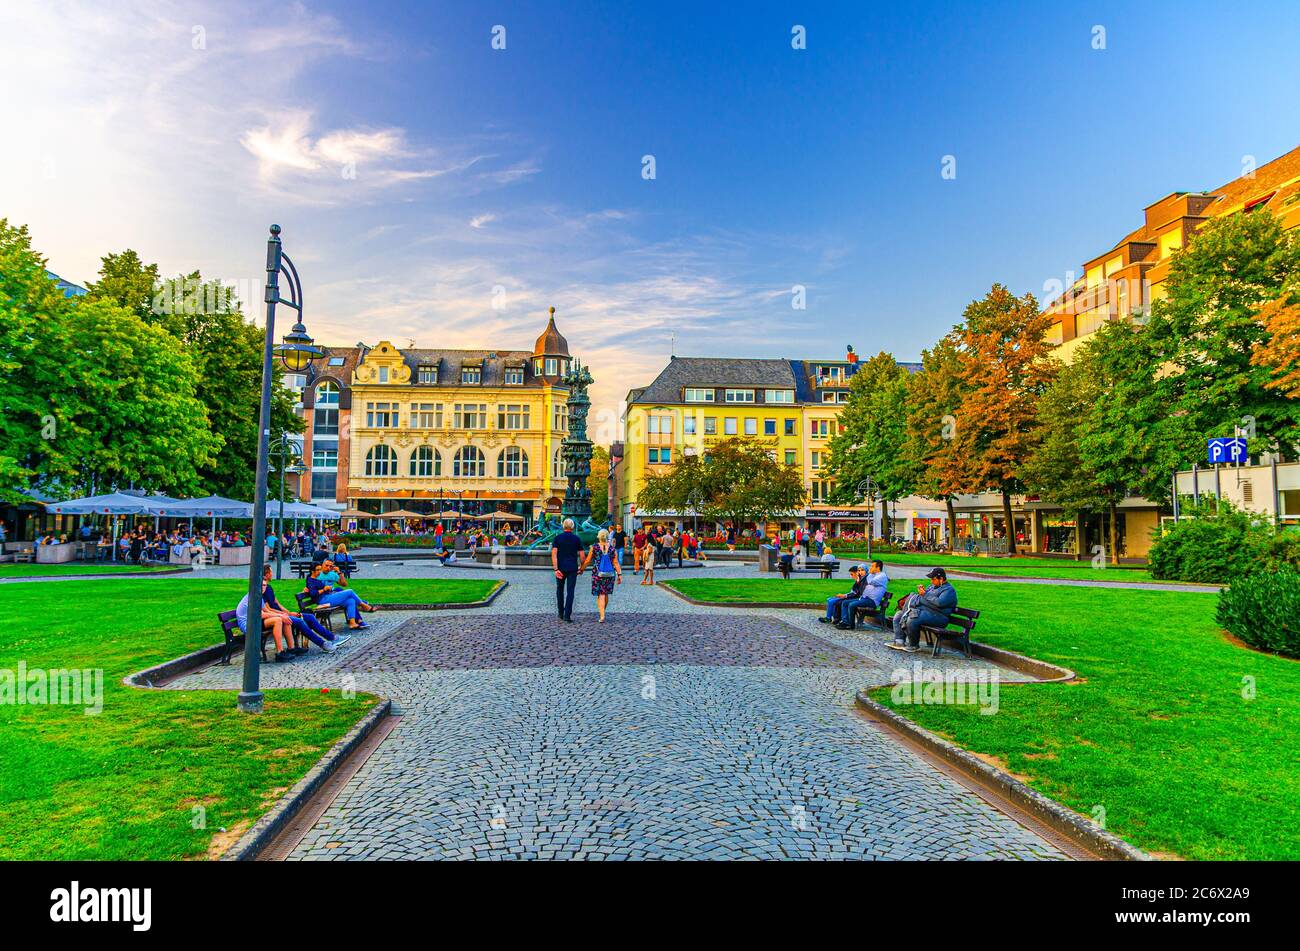 Koblenz, Germany, August 23, 2019: Gorresplatz square with old buildings, History Column fountain, green lawn and people sitting on benches in historical city centre, Rhineland-Palatinate state Stock Photo